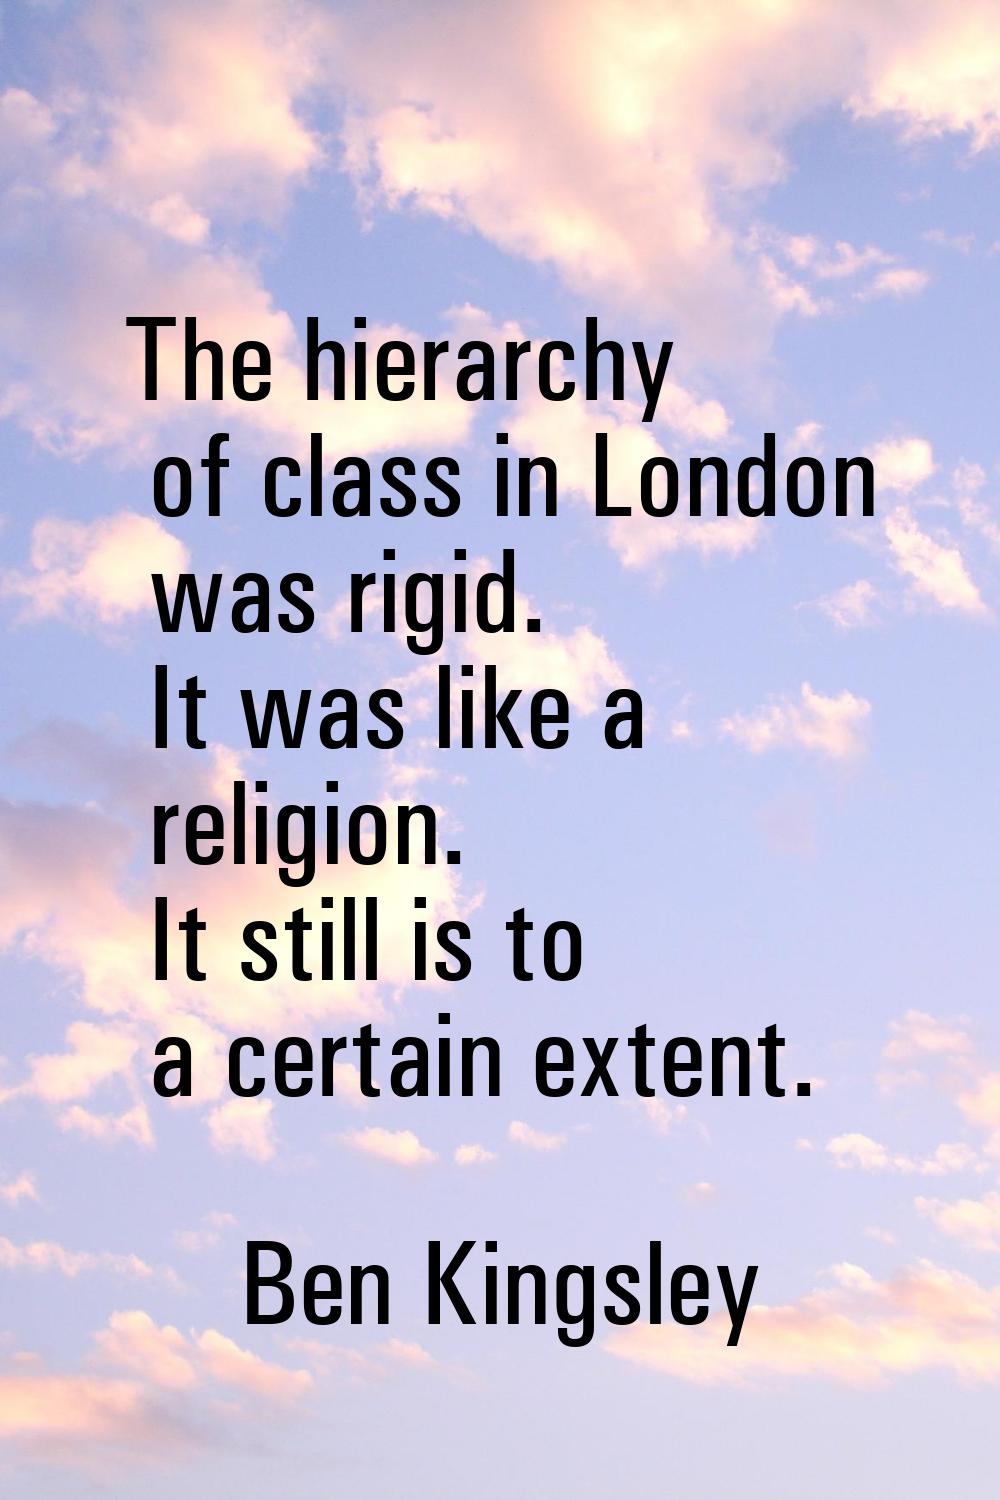 The hierarchy of class in London was rigid. It was like a religion. It still is to a certain extent